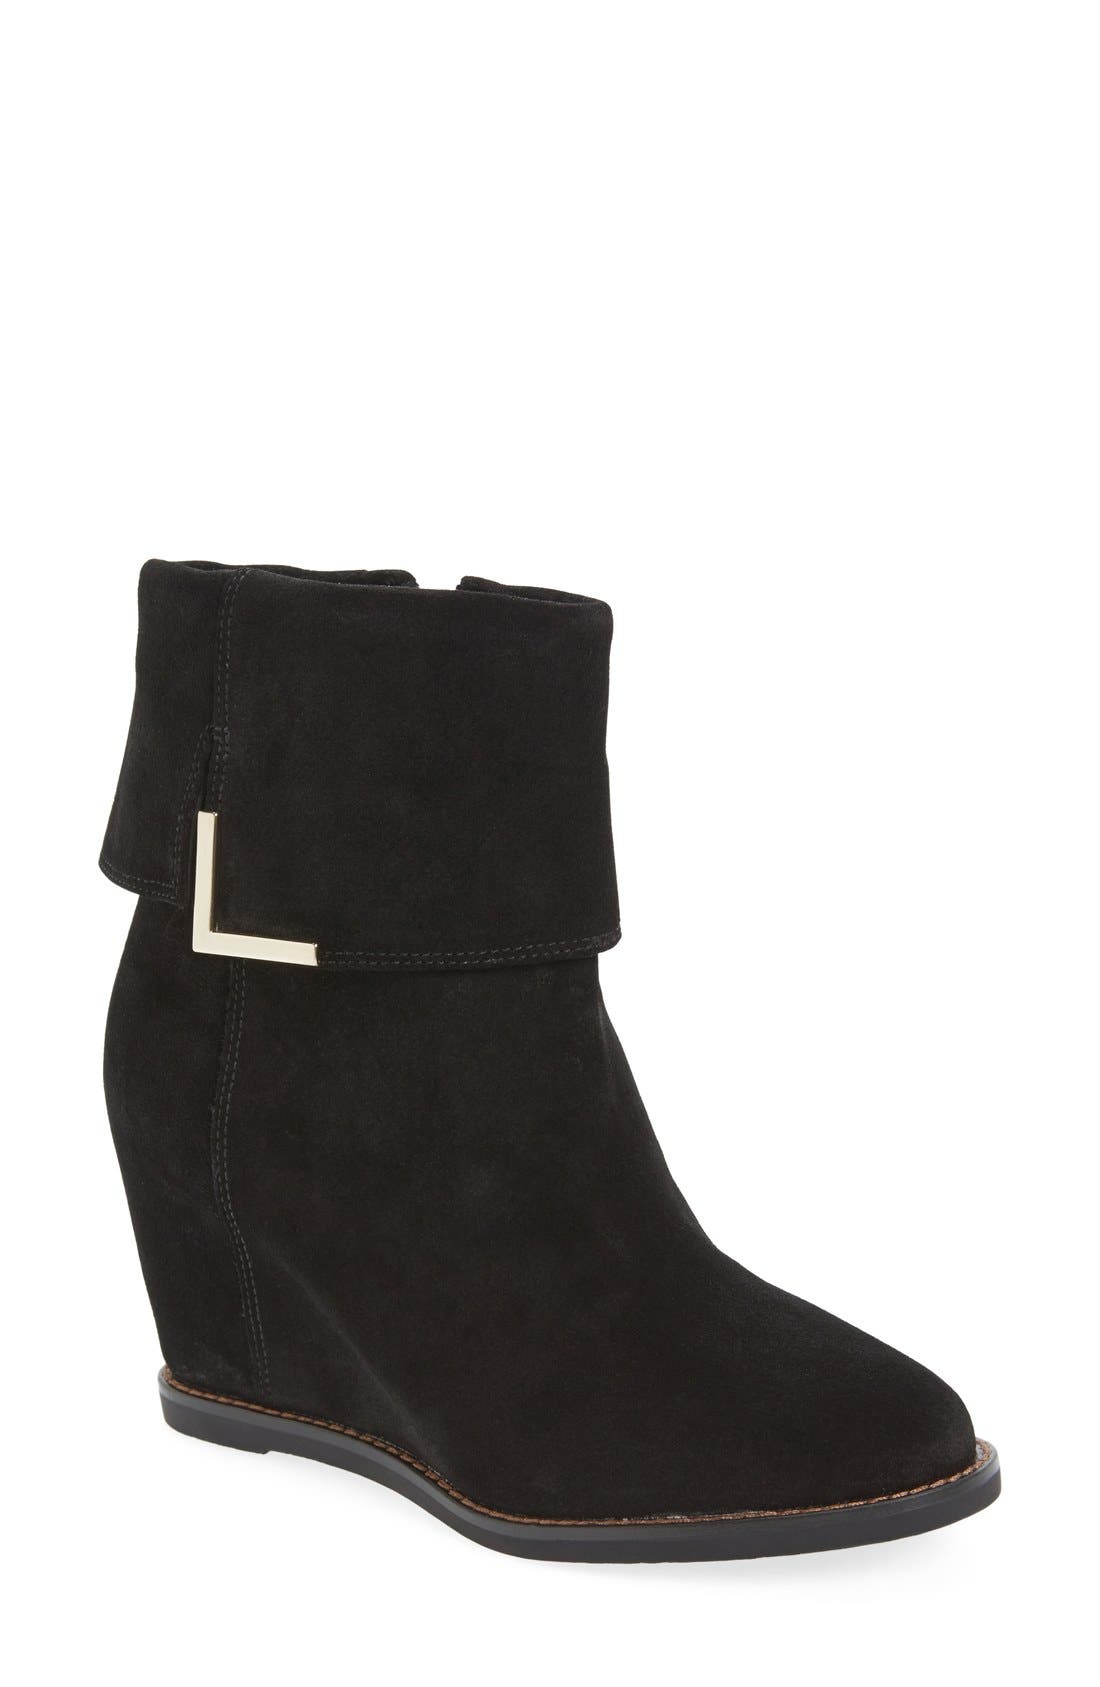 johnston and murphy womens booties